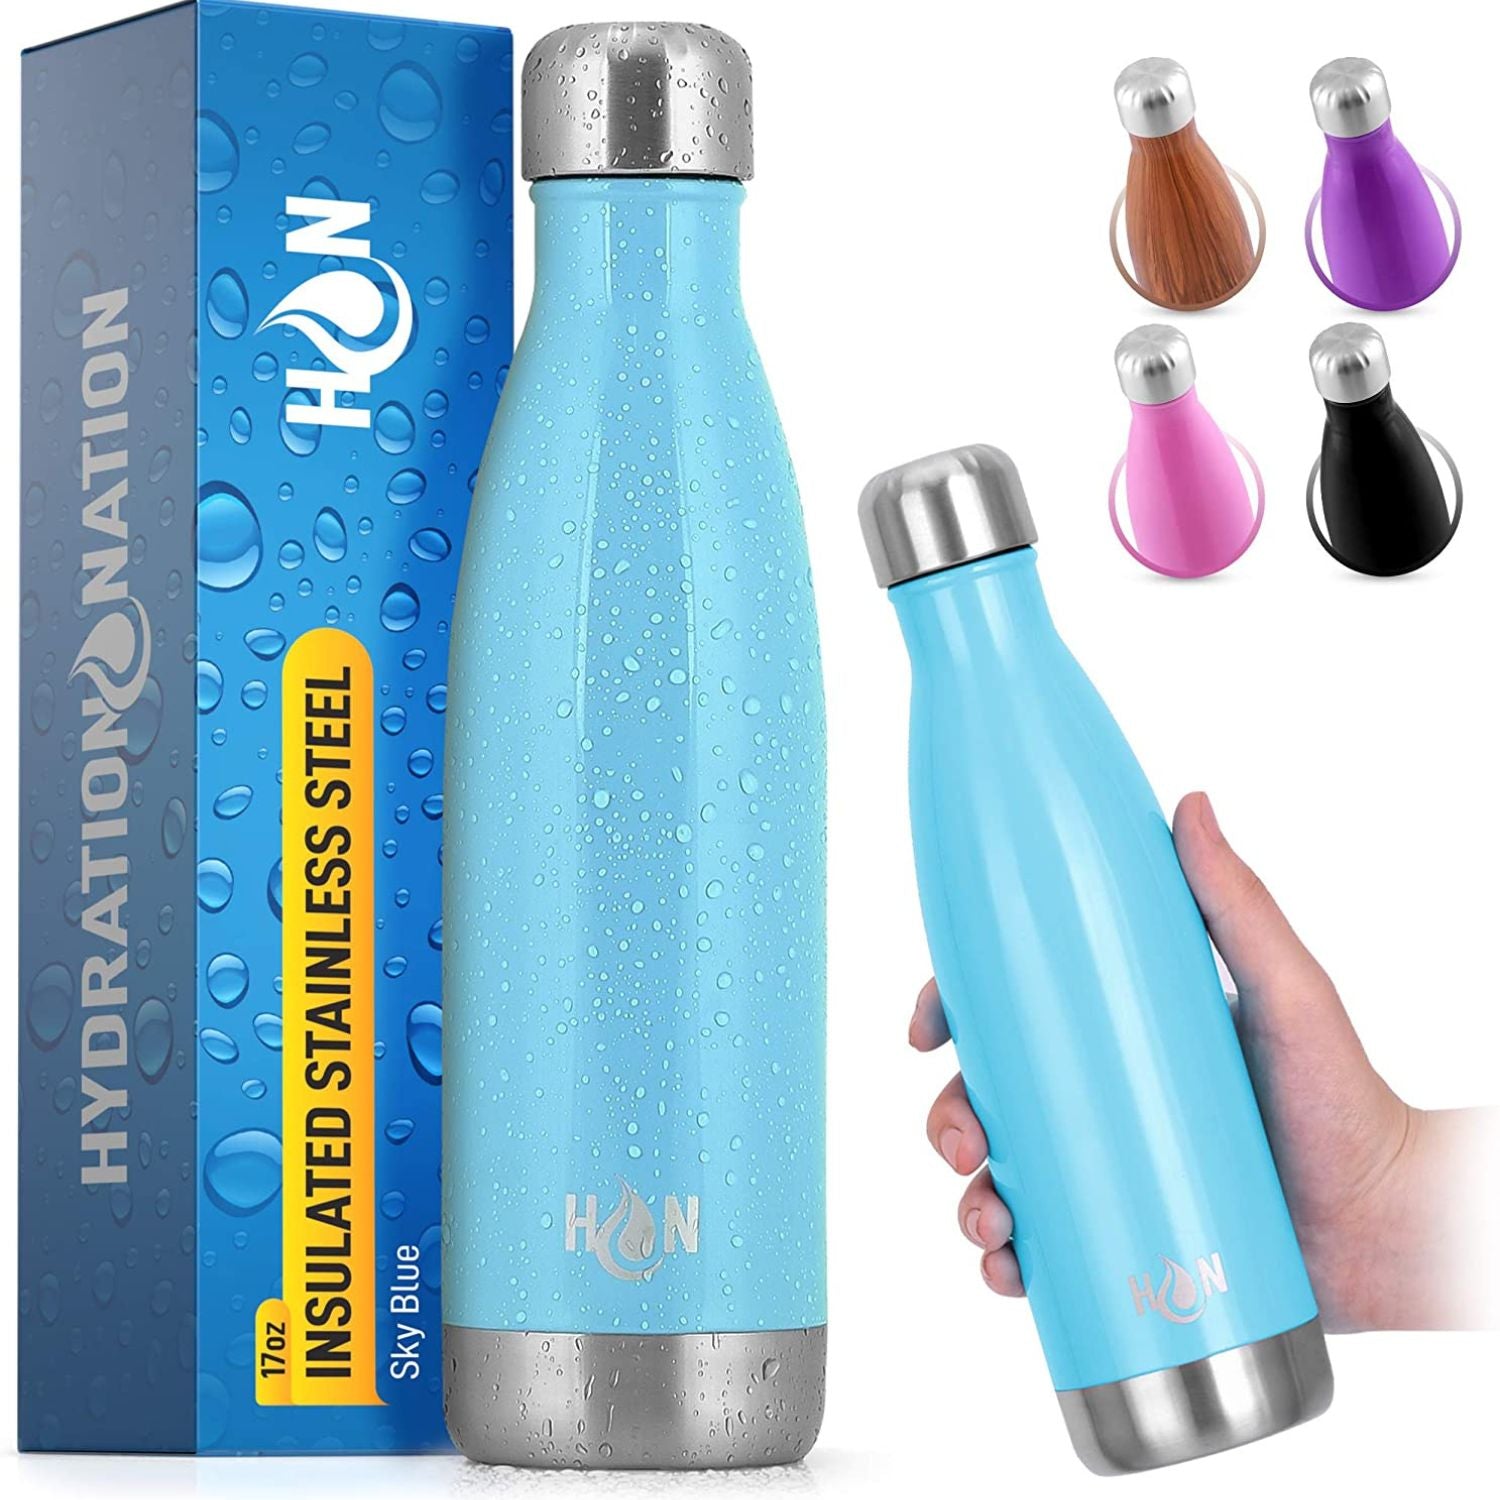 Hydration Nation Double Wall Insulated Water Bottle Wood Grain 34oz